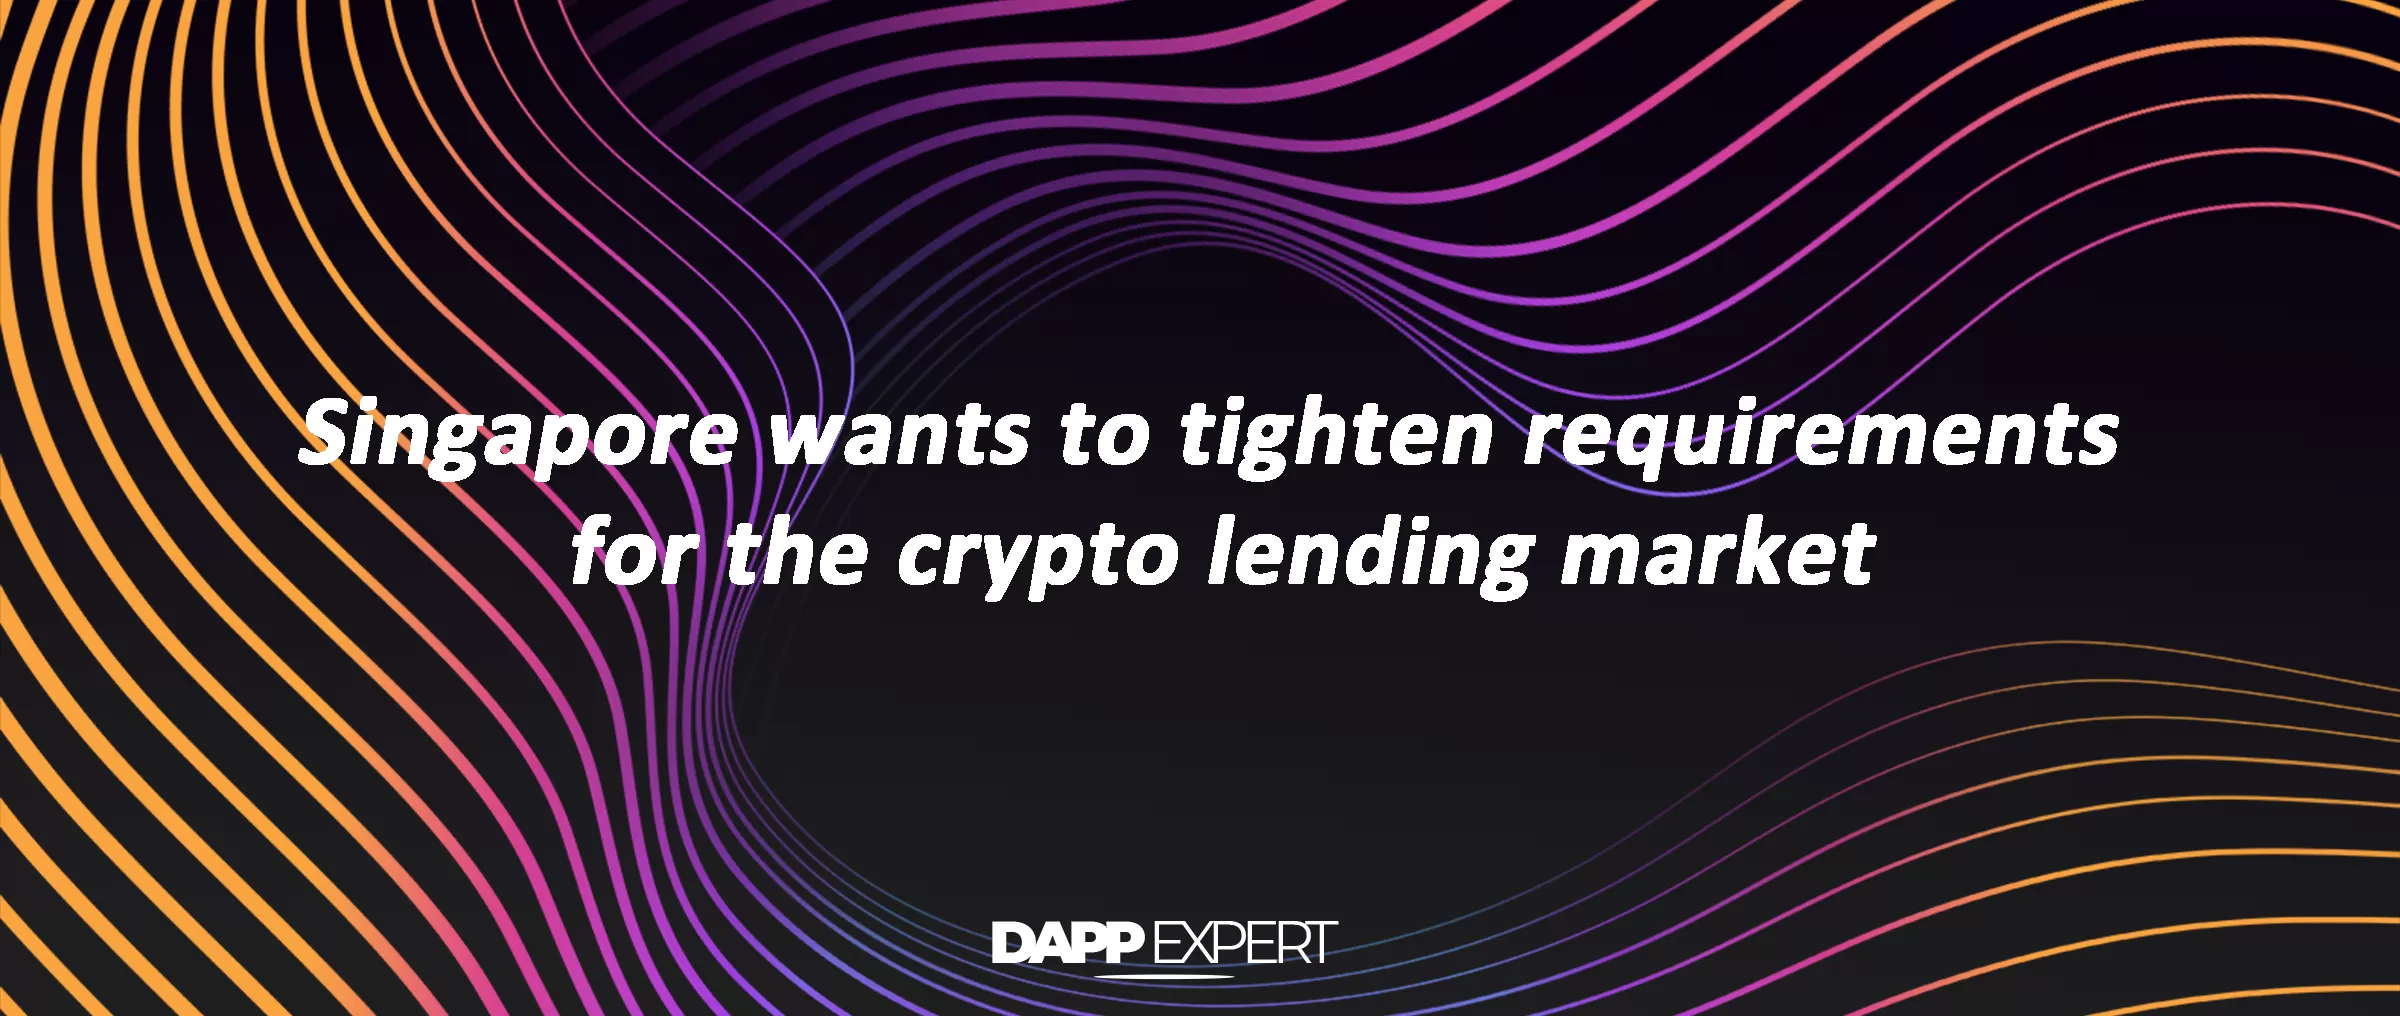 Singapore wants to tighten requirements for the crypto lending market